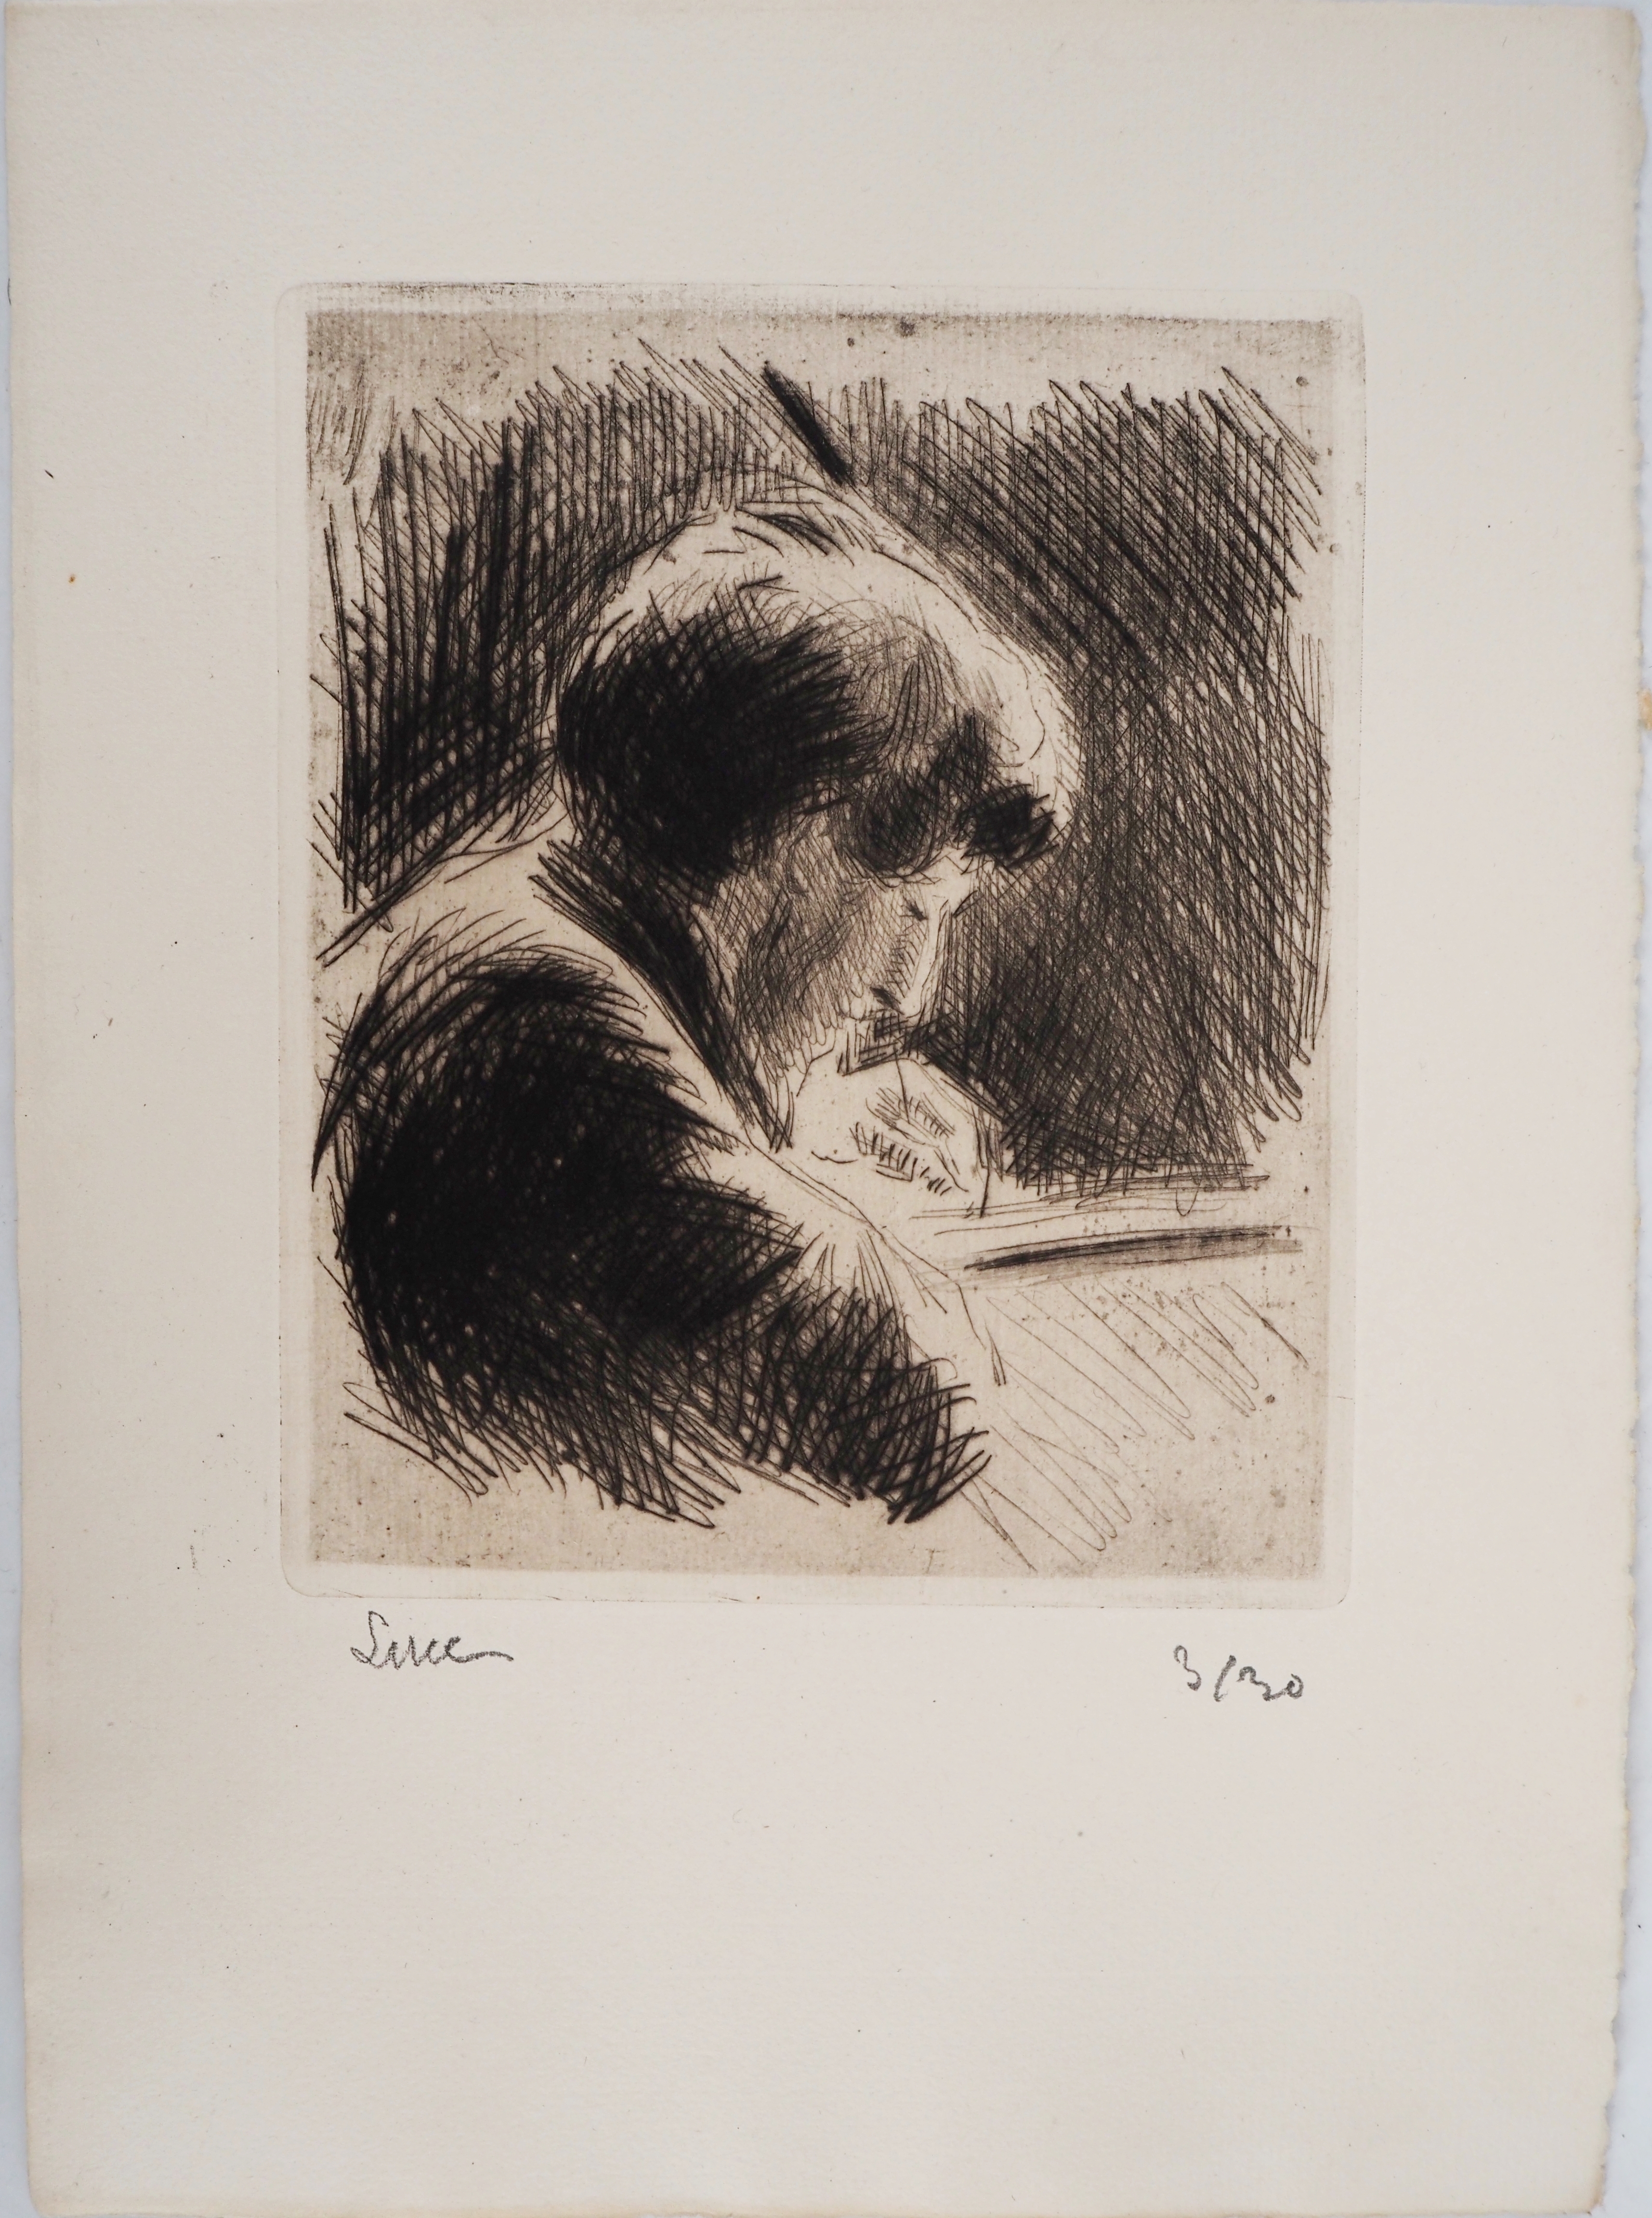 Woman with short hair, straight profile by Maximilien Luce, ca. 1890